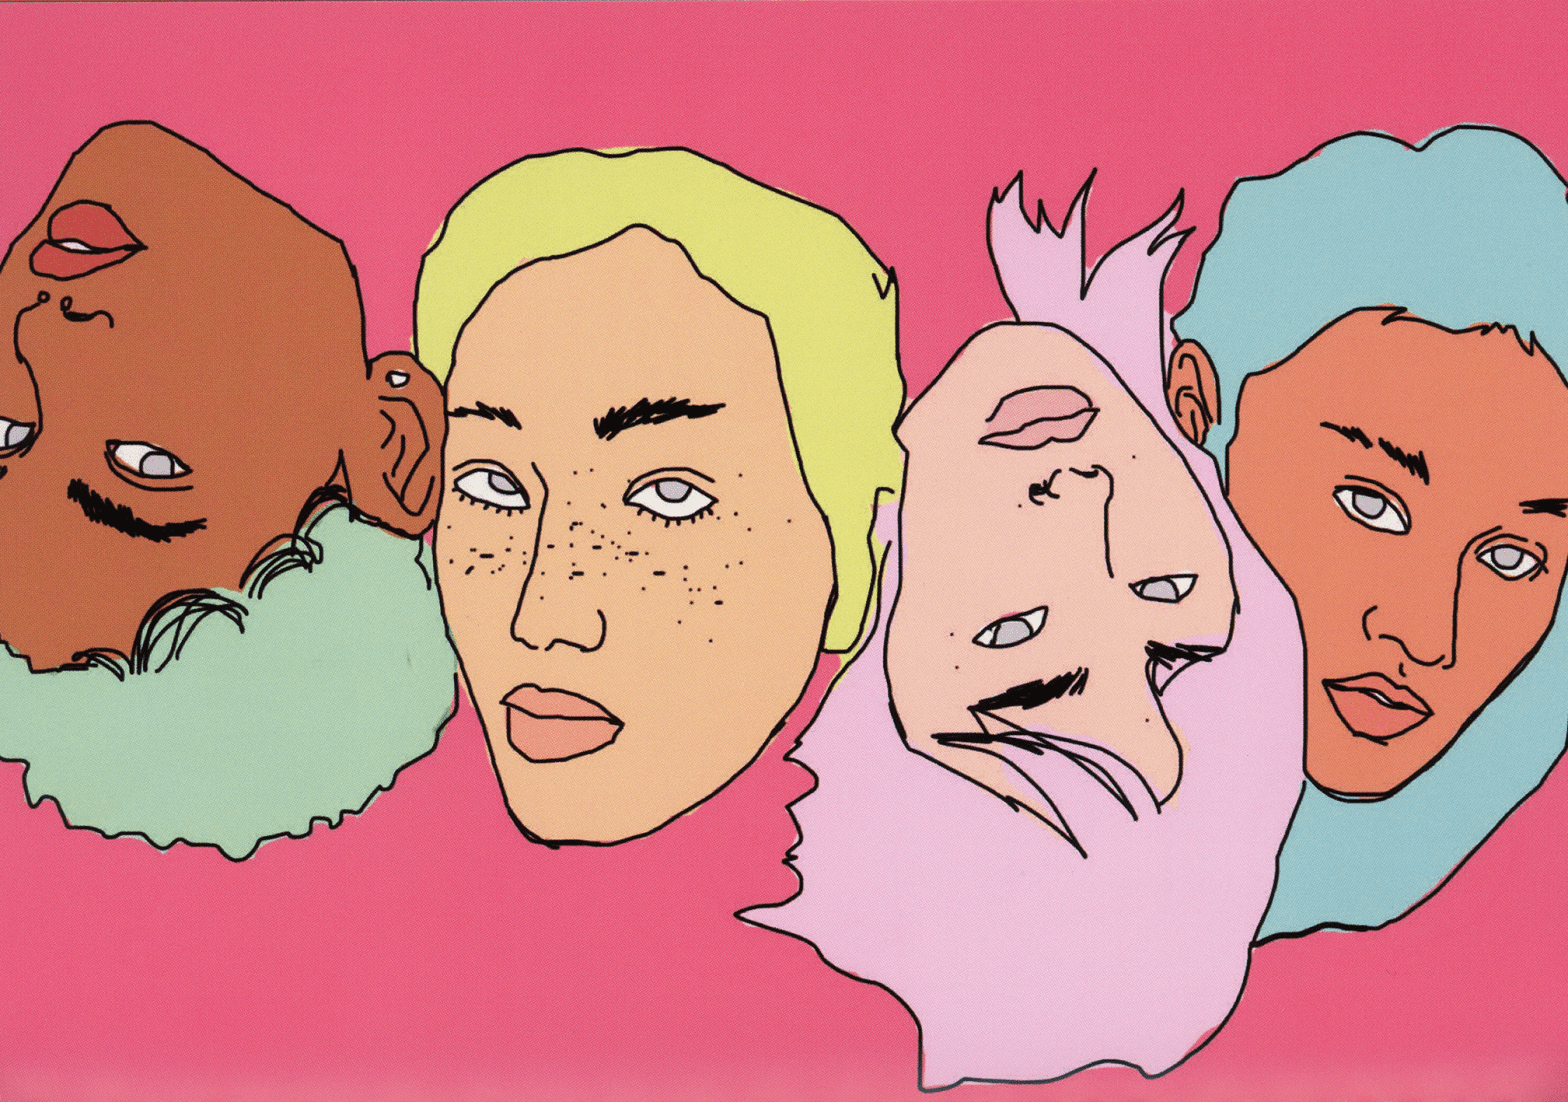 A digital illustration depicting four female faces with pink, blue, yellow and turquoise hair. They are of differing ethnicities. The background is hot pink.